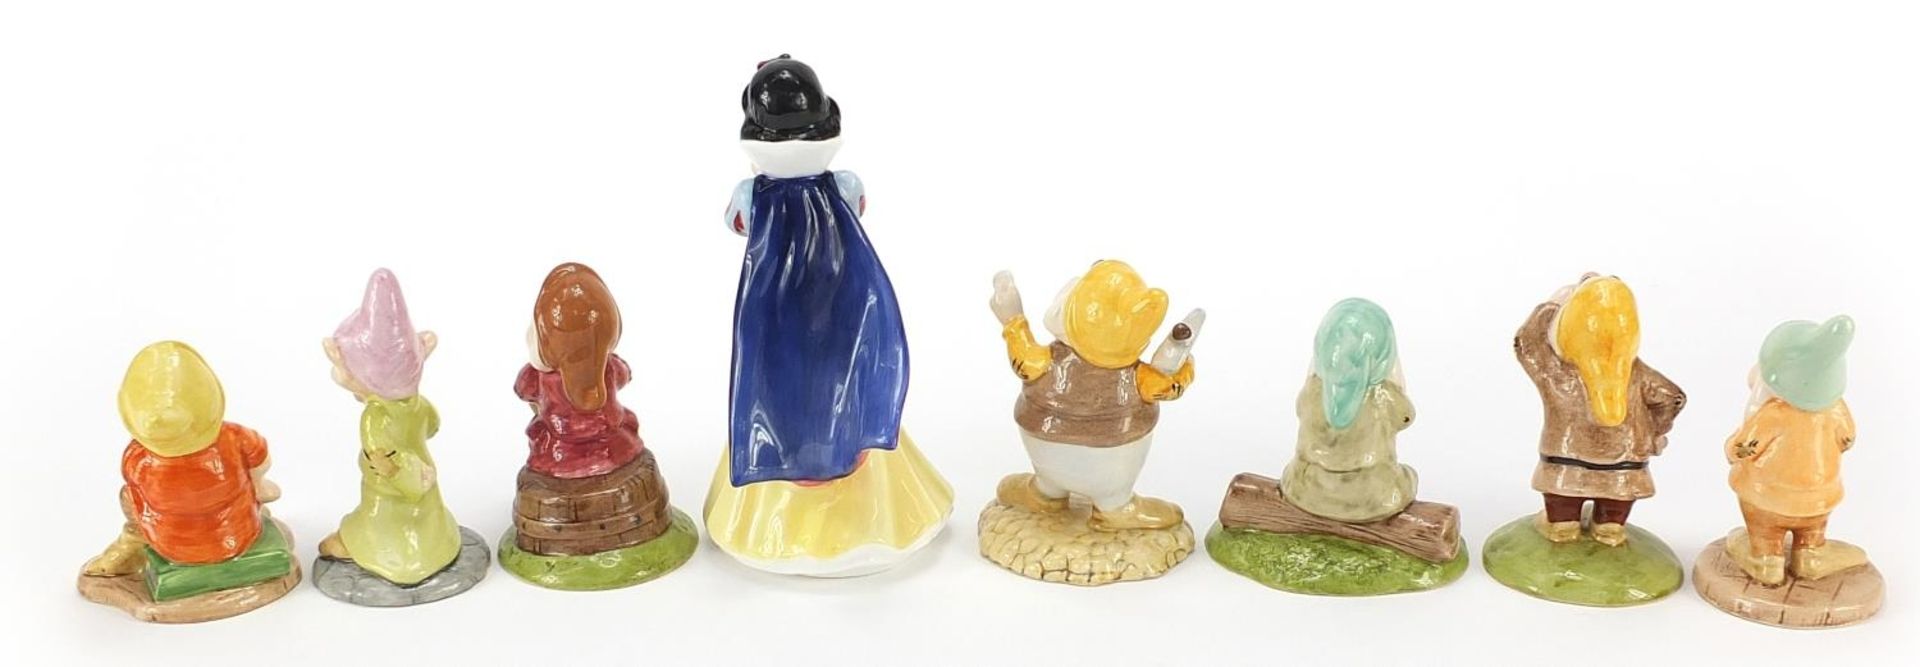 Royal Doulton Snow White & The Seven Dwarfs with boxes, the largest 15cm high - Image 5 of 7